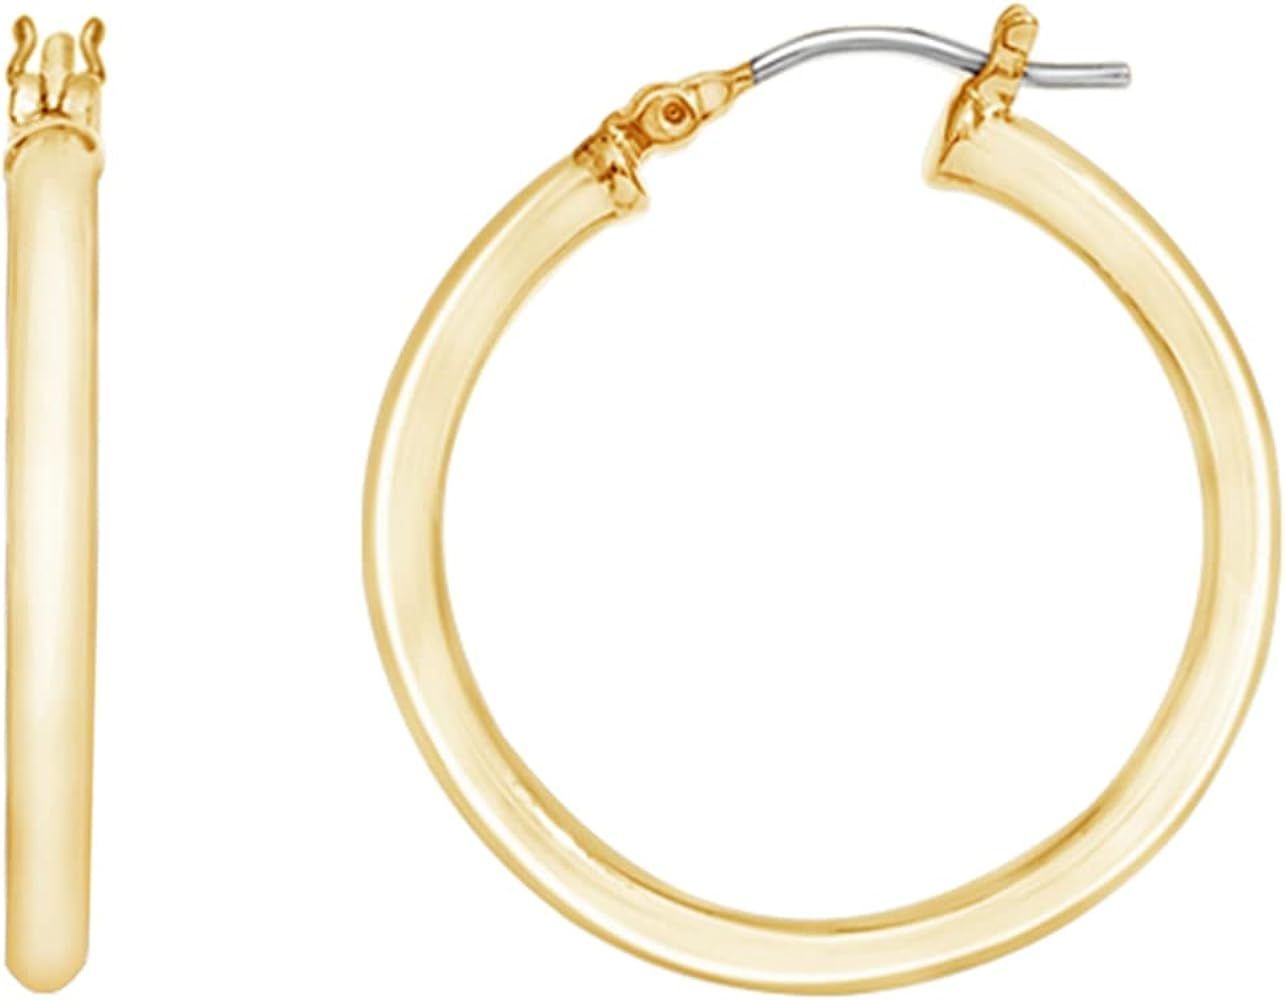 Amazon Essentials 14K Gold or Rhodium Plated Full Round Hoop Earrings | Amazon (US)